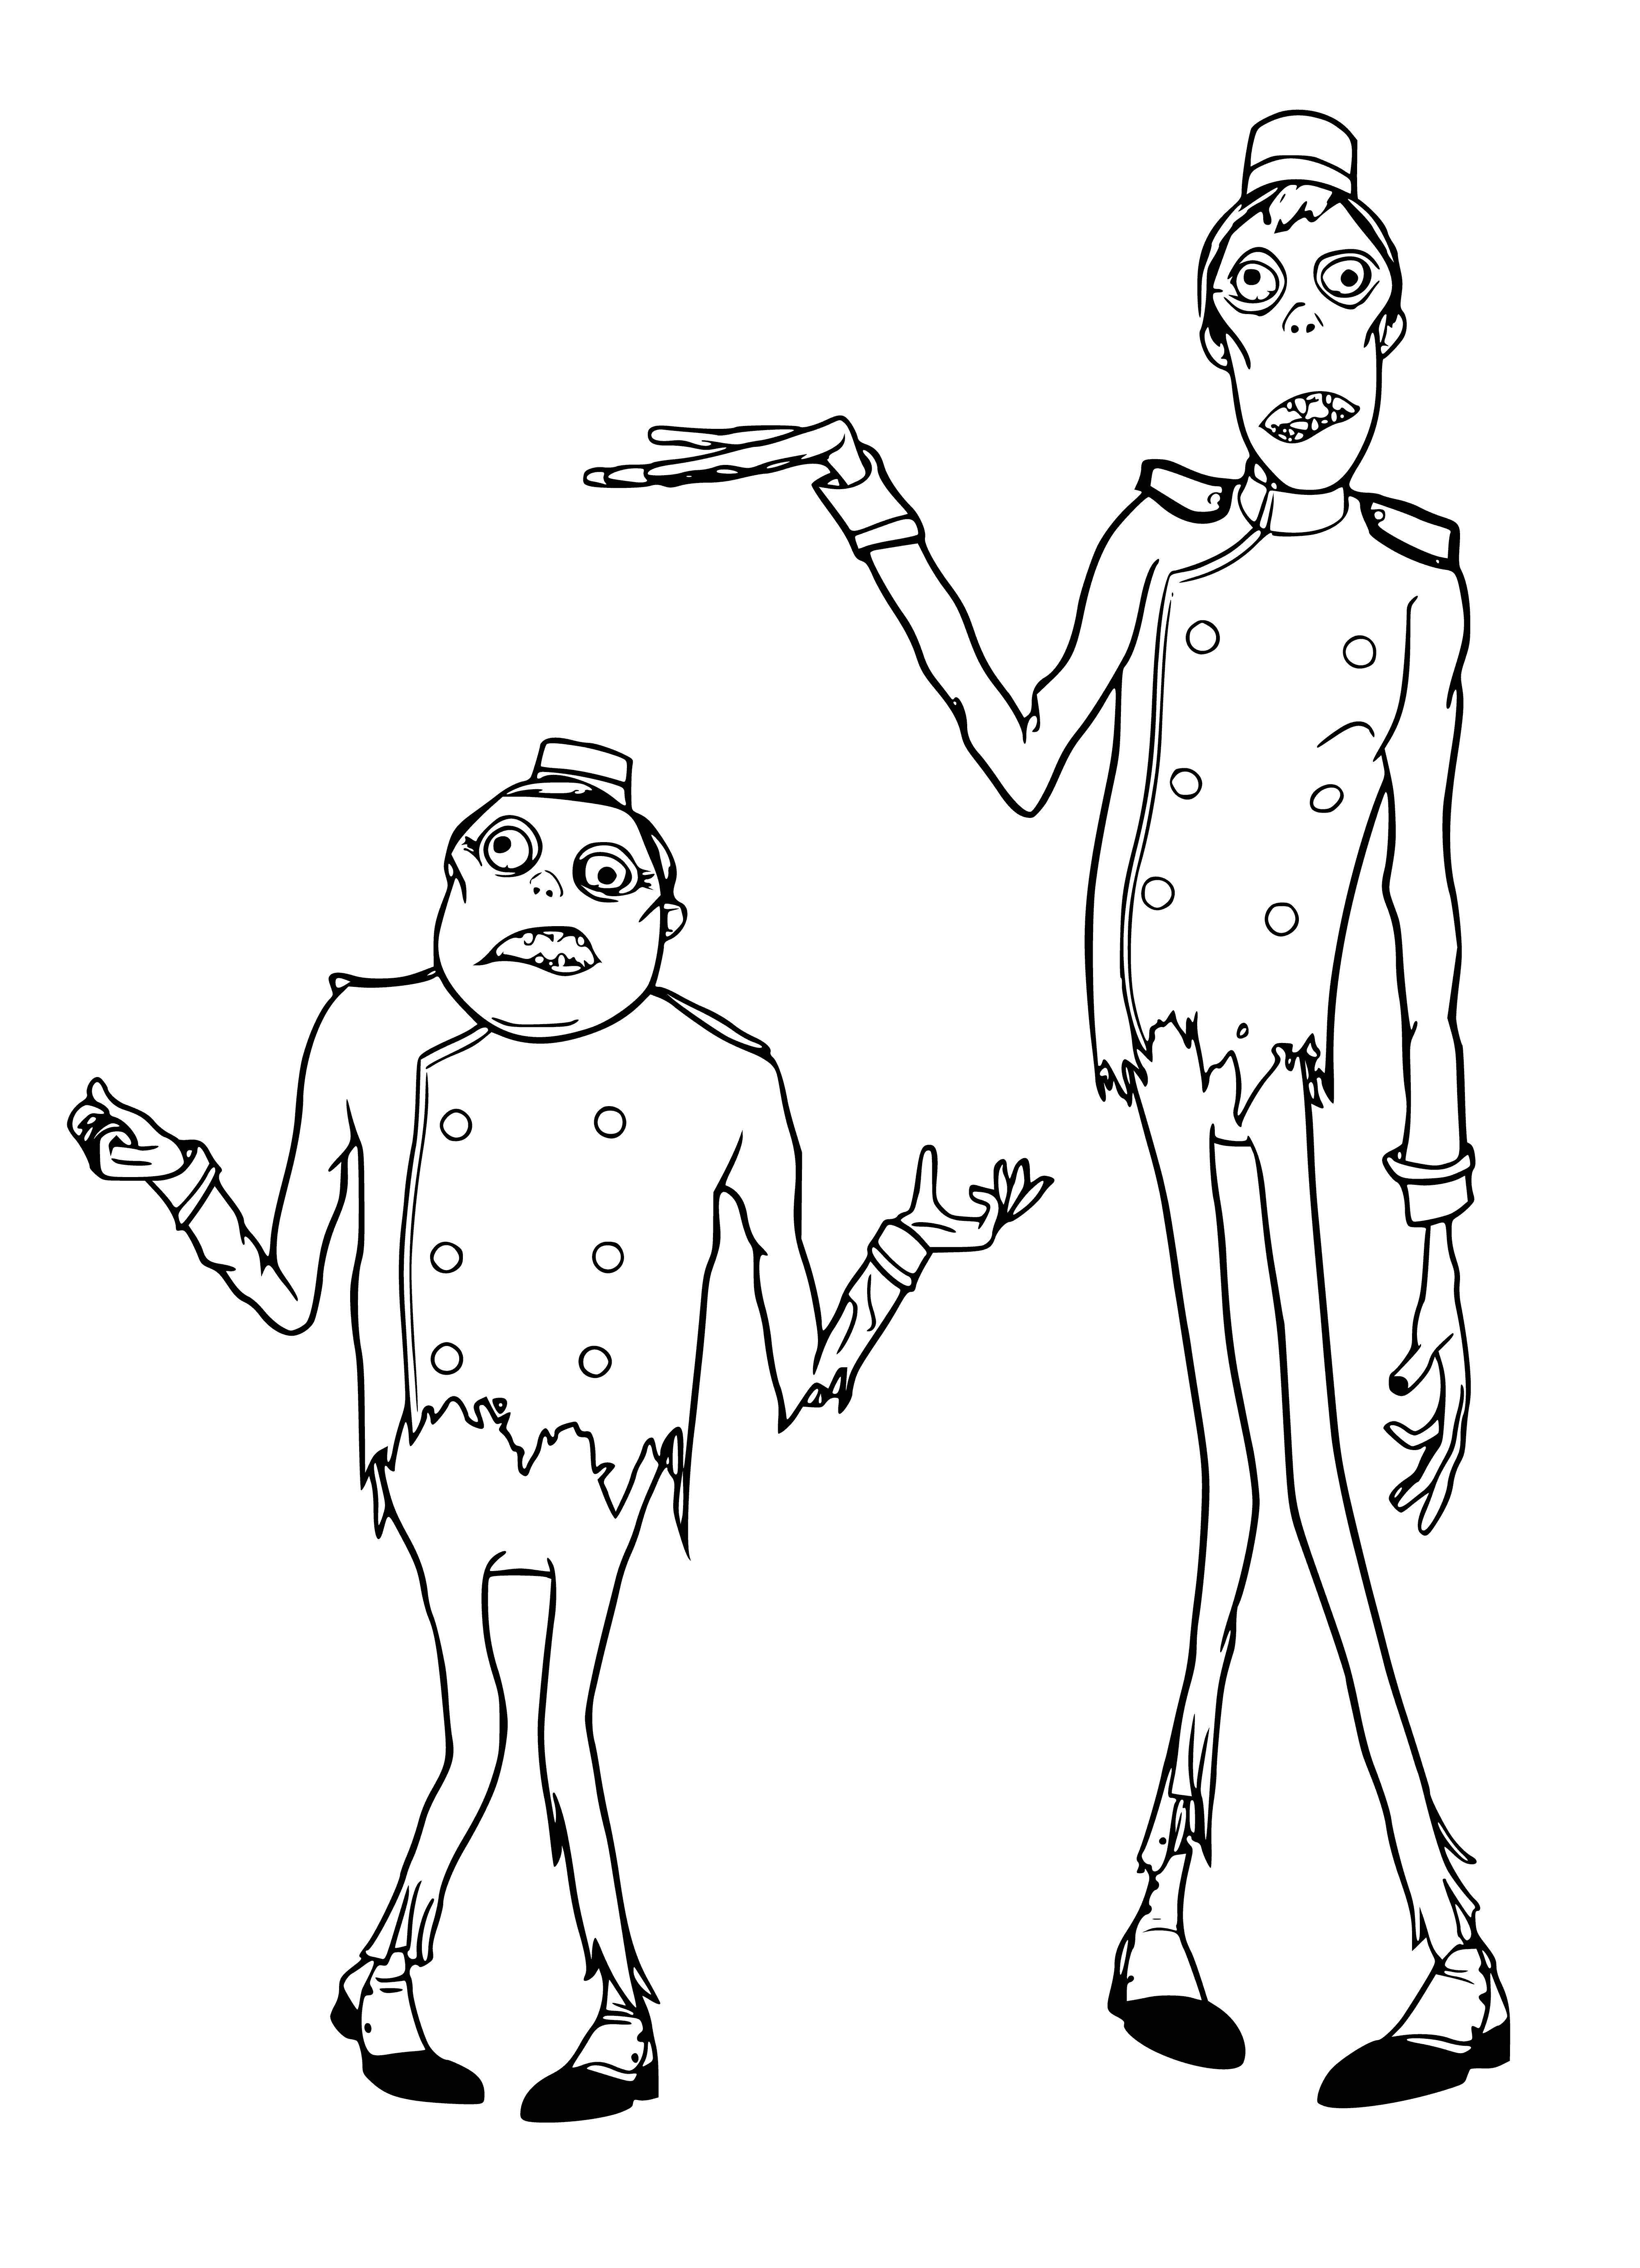 Zombie coloring page